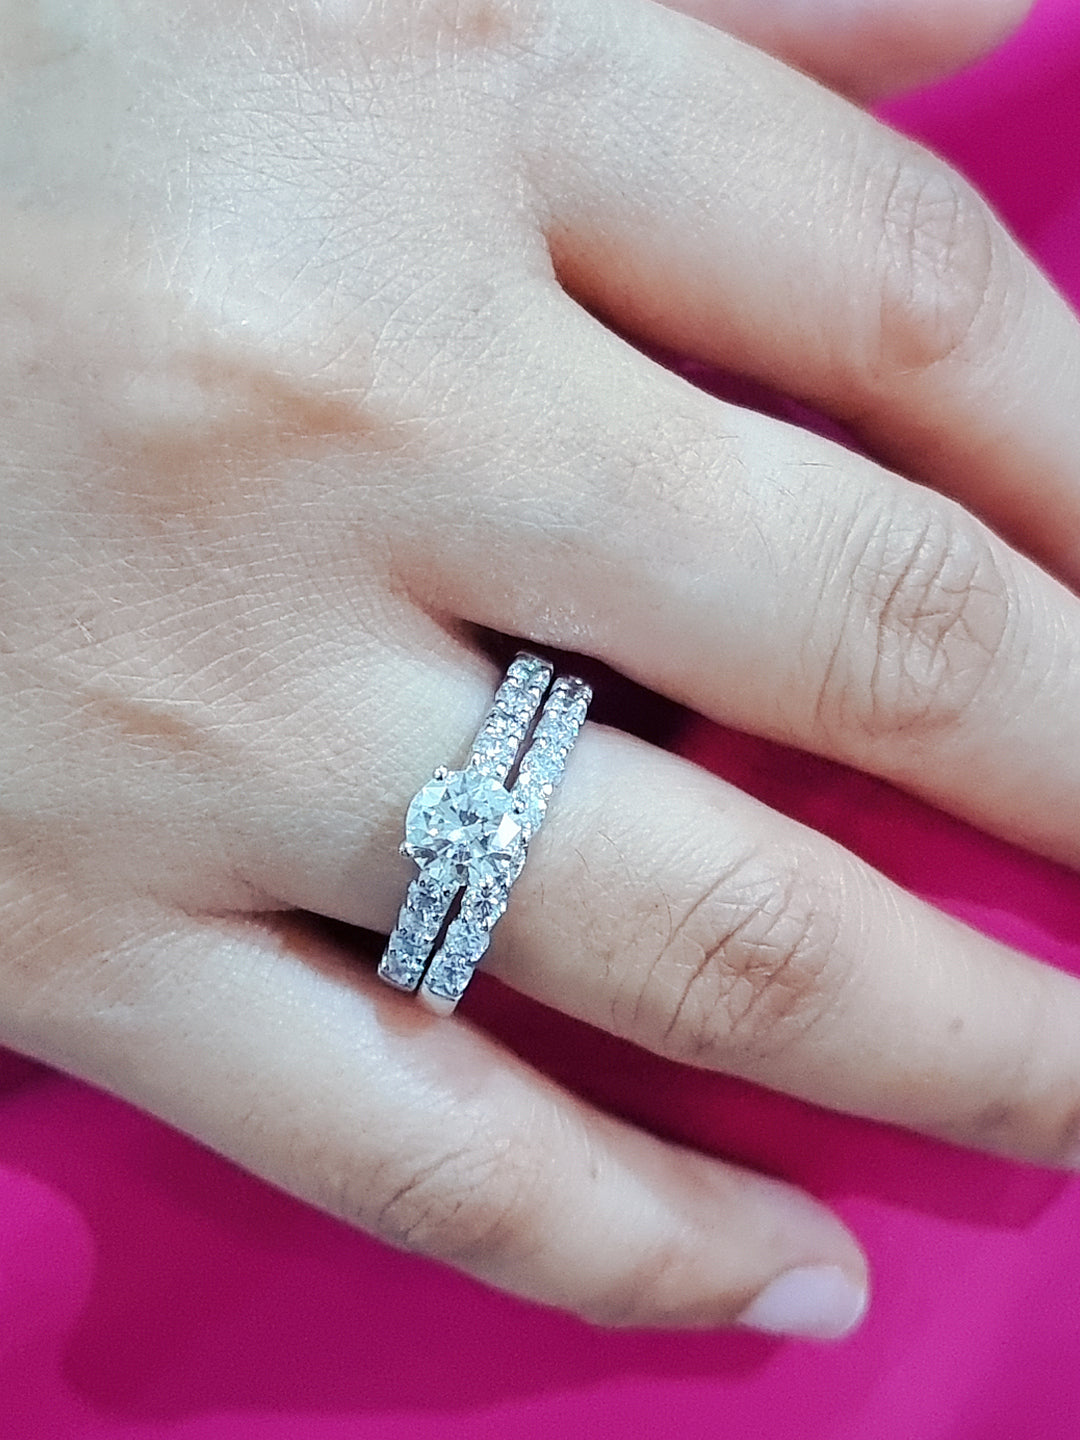 Solitaire Engagement Ring And Wedding Band Set In 18k White Gold.